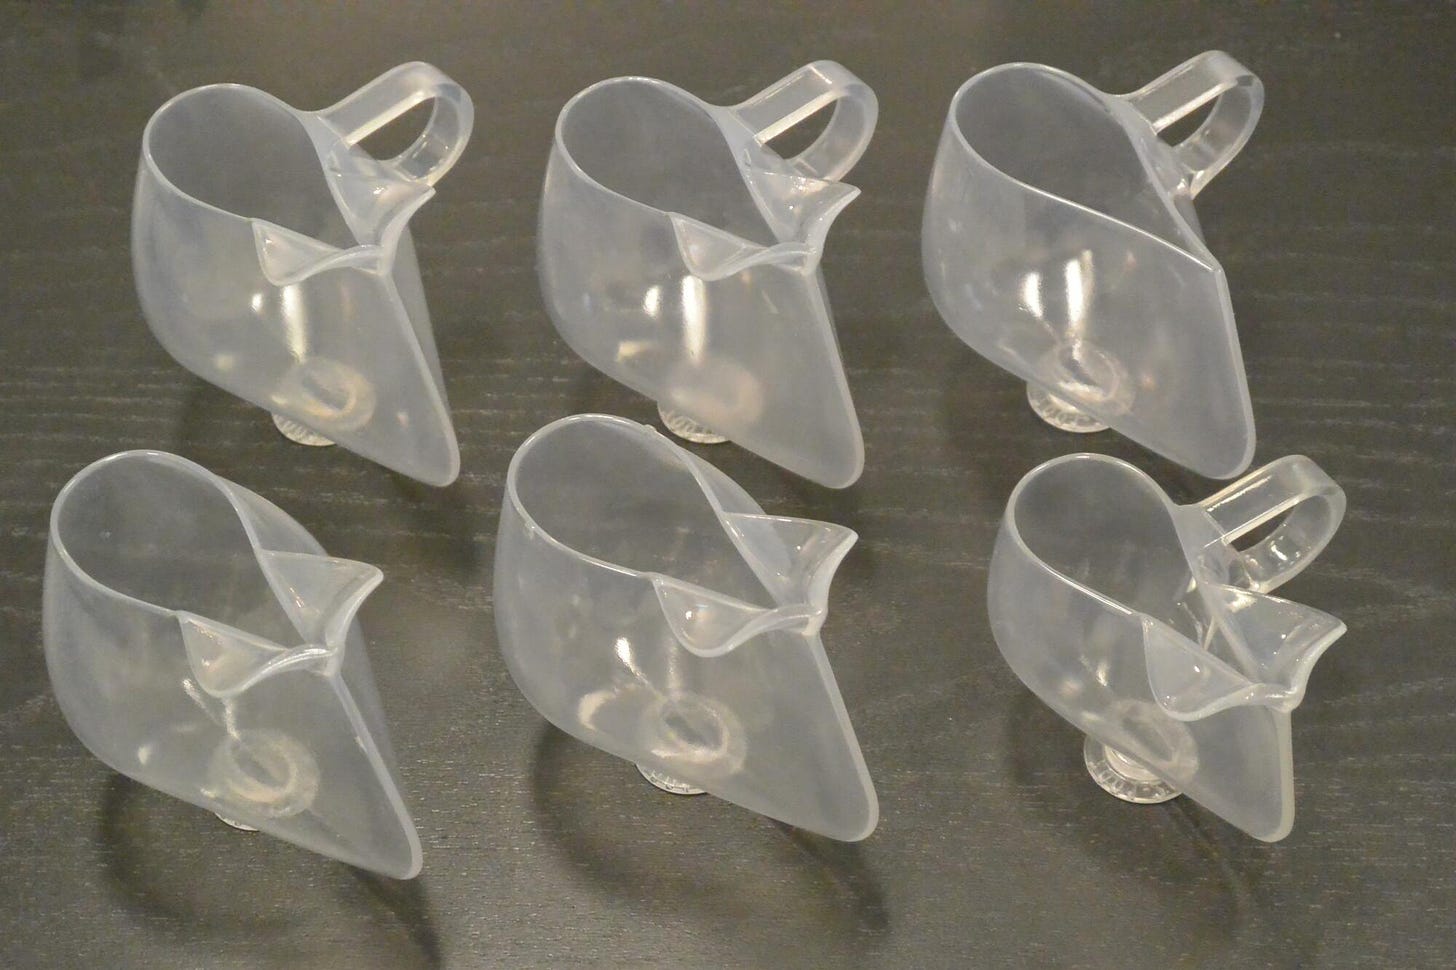 Models of space cups